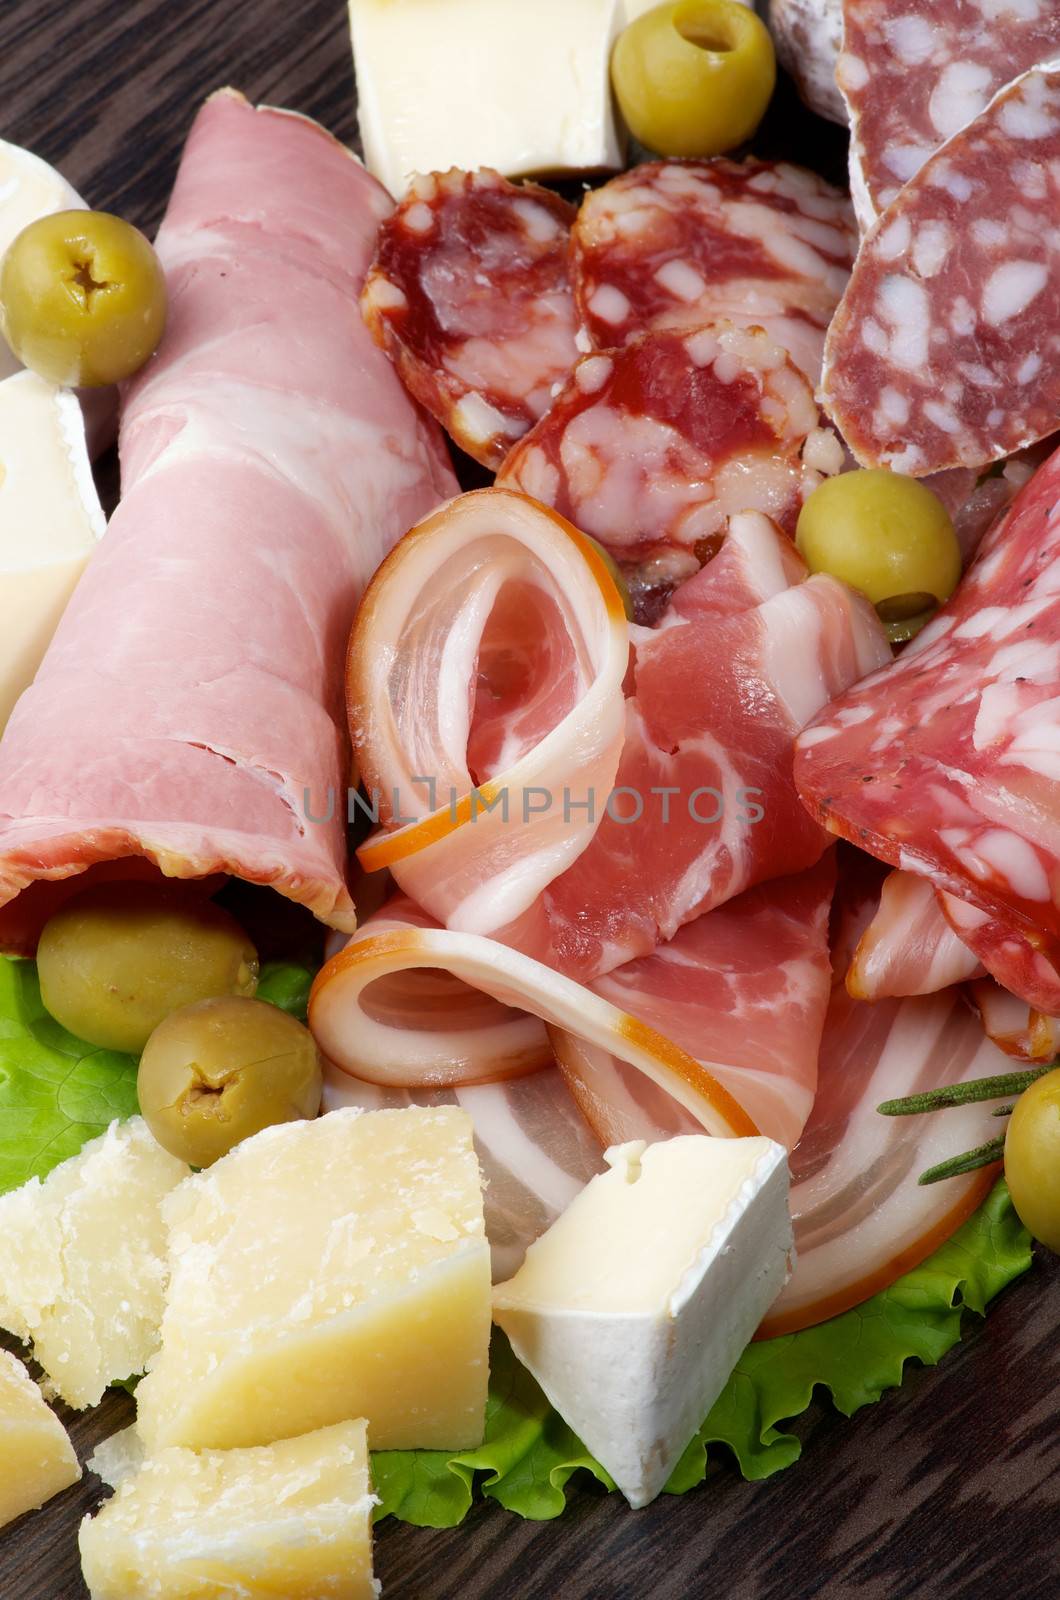 Heap of Delicatessen Cold Cuts with Smoked Ham, Pepperoni, Salami, Finocchiona, and Various Cheese with Grana Padano, Camembert and Brie  closeup on Dark Wooden background